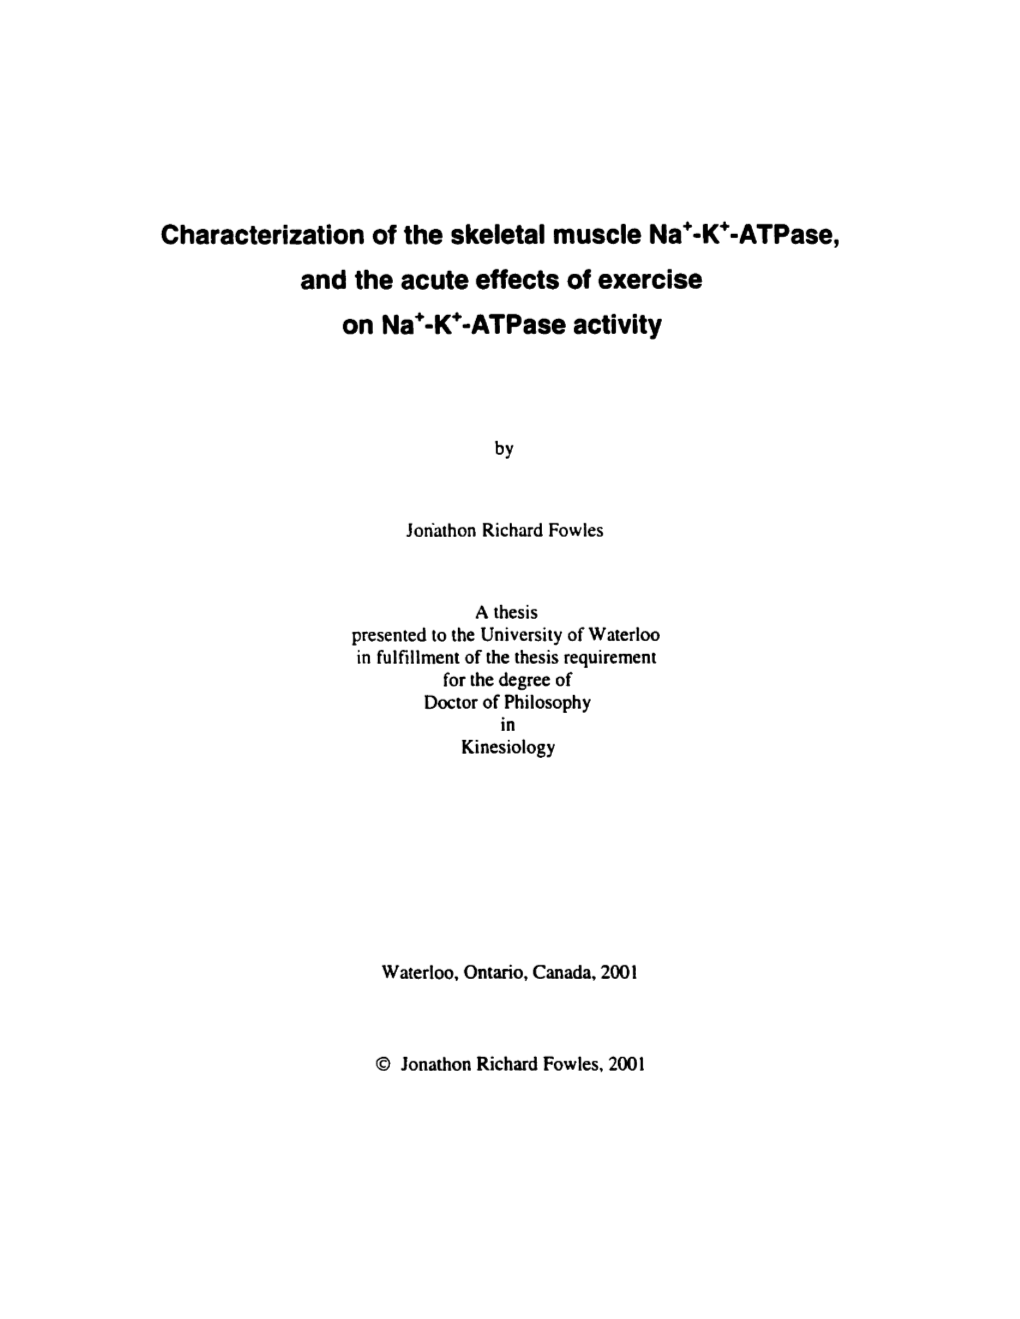 Characterization of the Skeletal Muscle Na+-K+-Atpase, and the Acute Effects of Exercise on Na'-K'-Atpase Activity